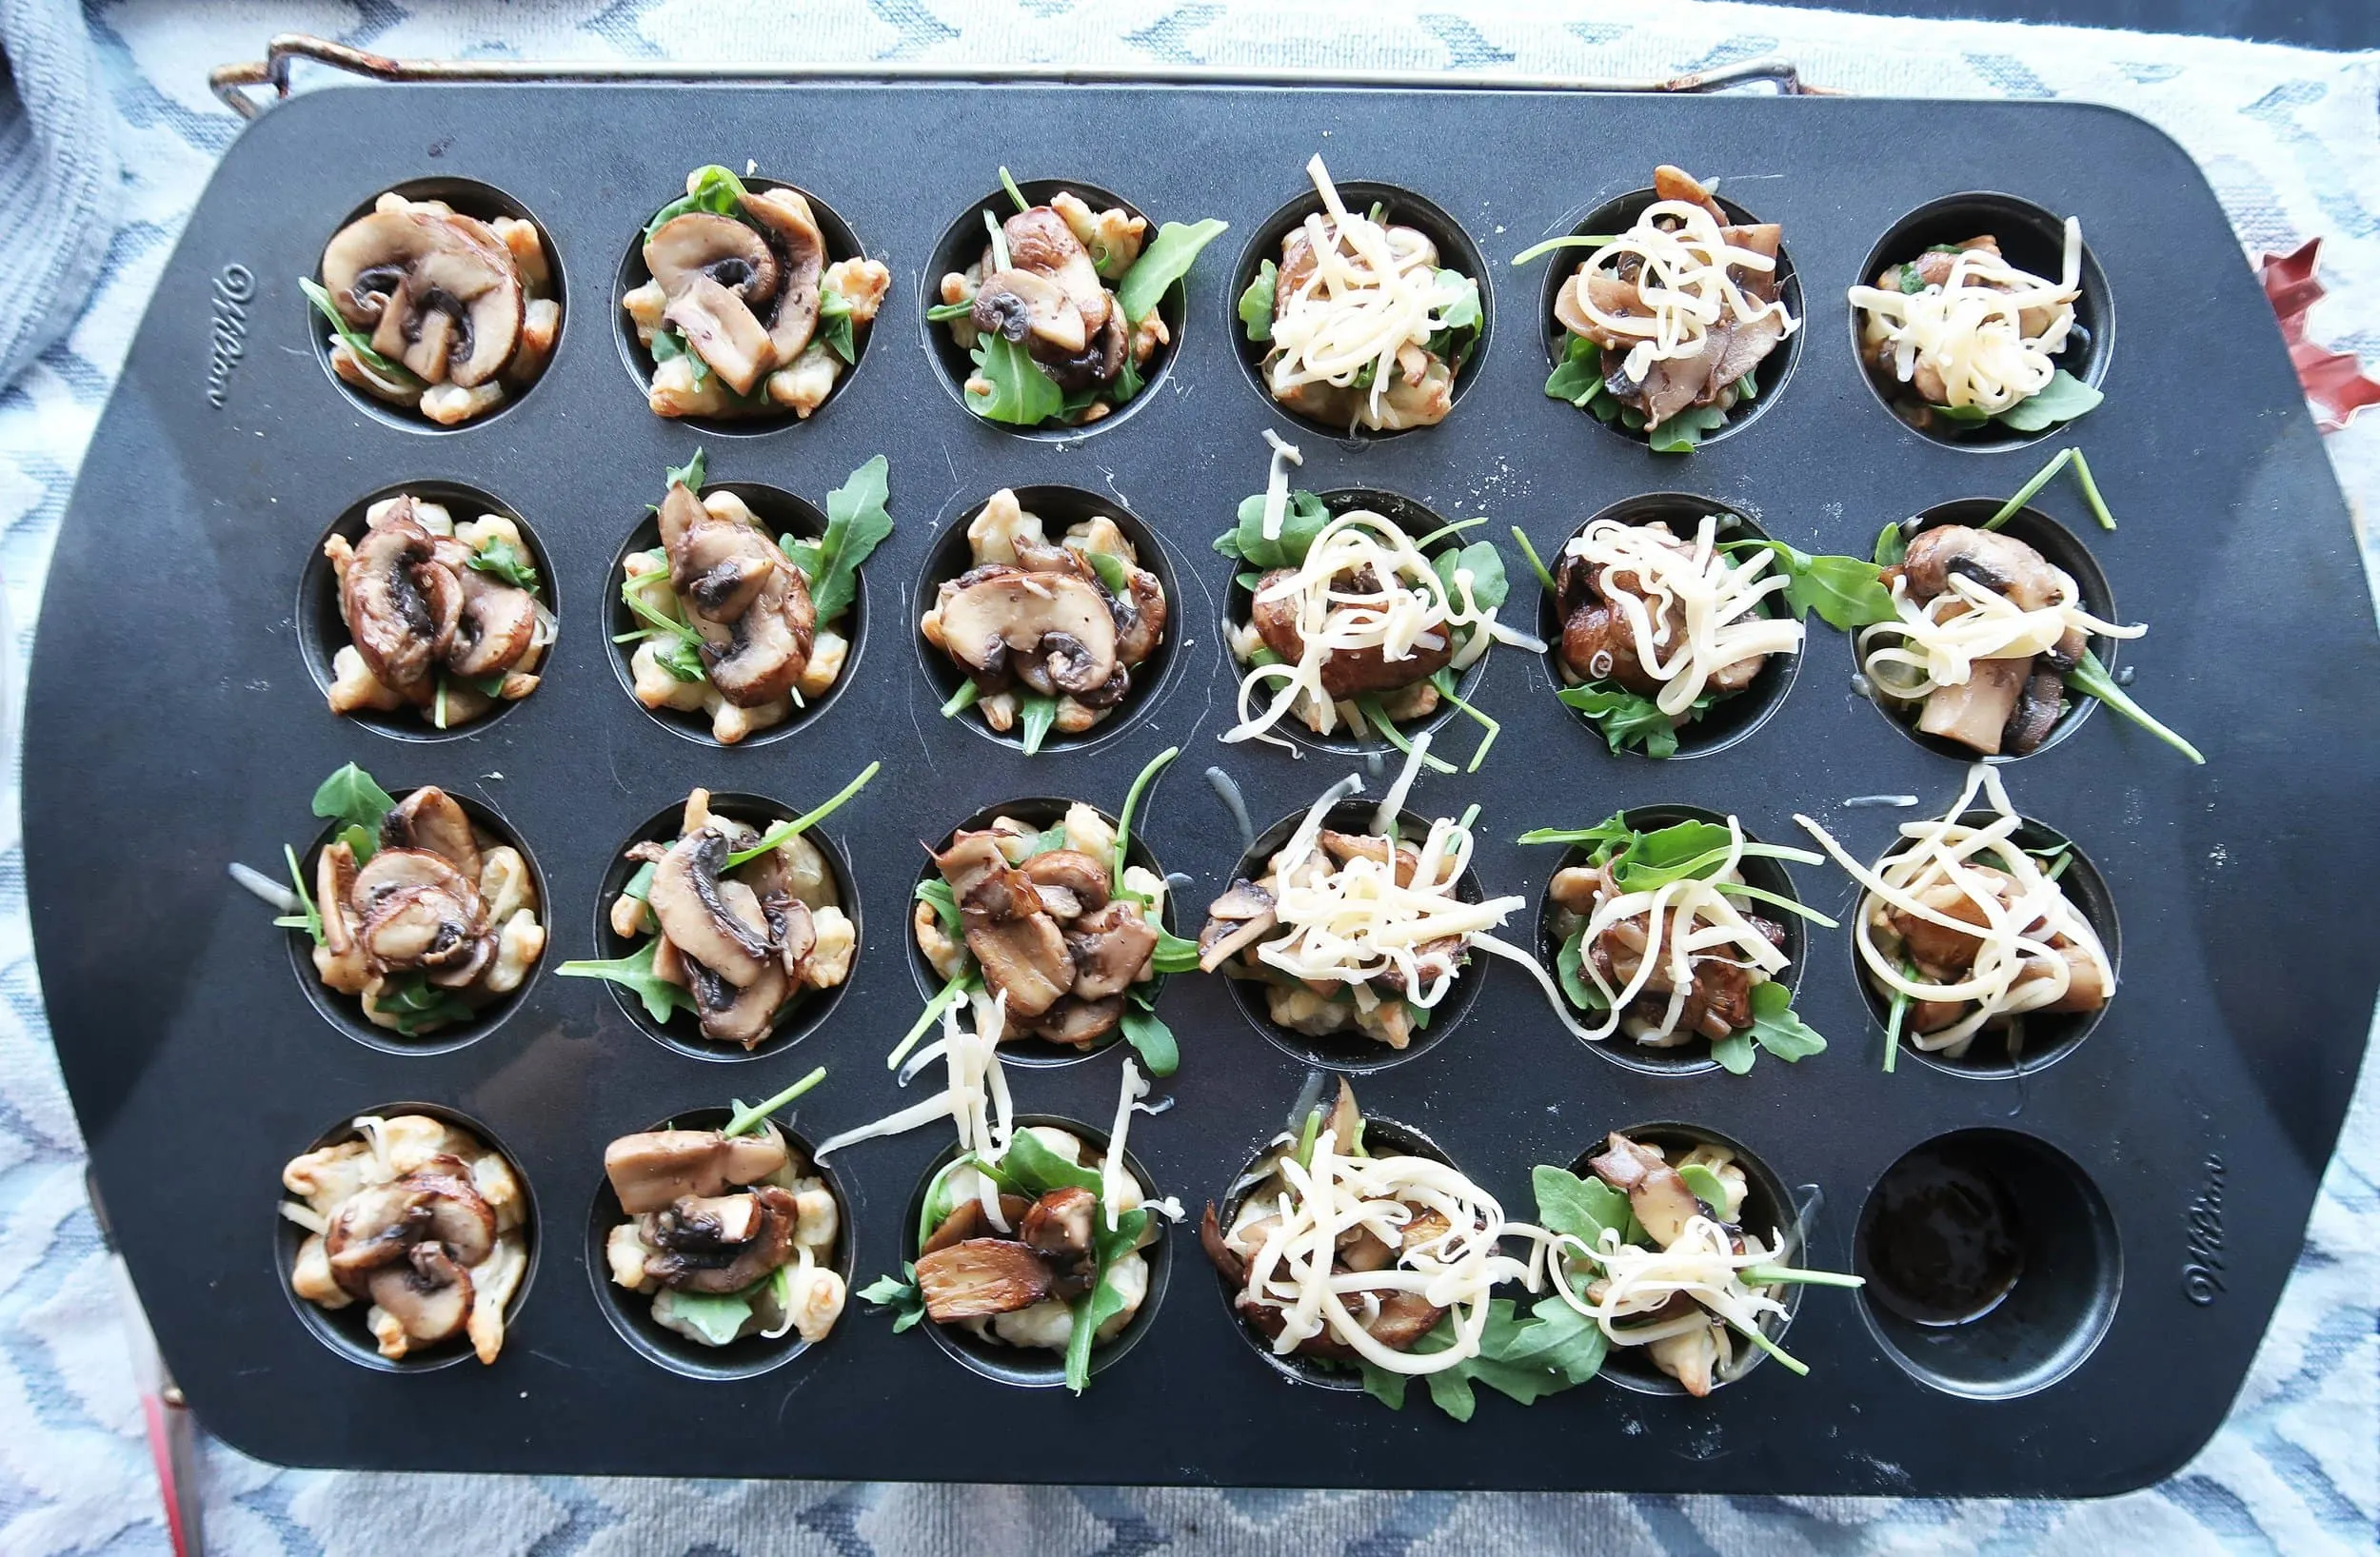 Mushroom arugula tarts topped with green onions and cheese.